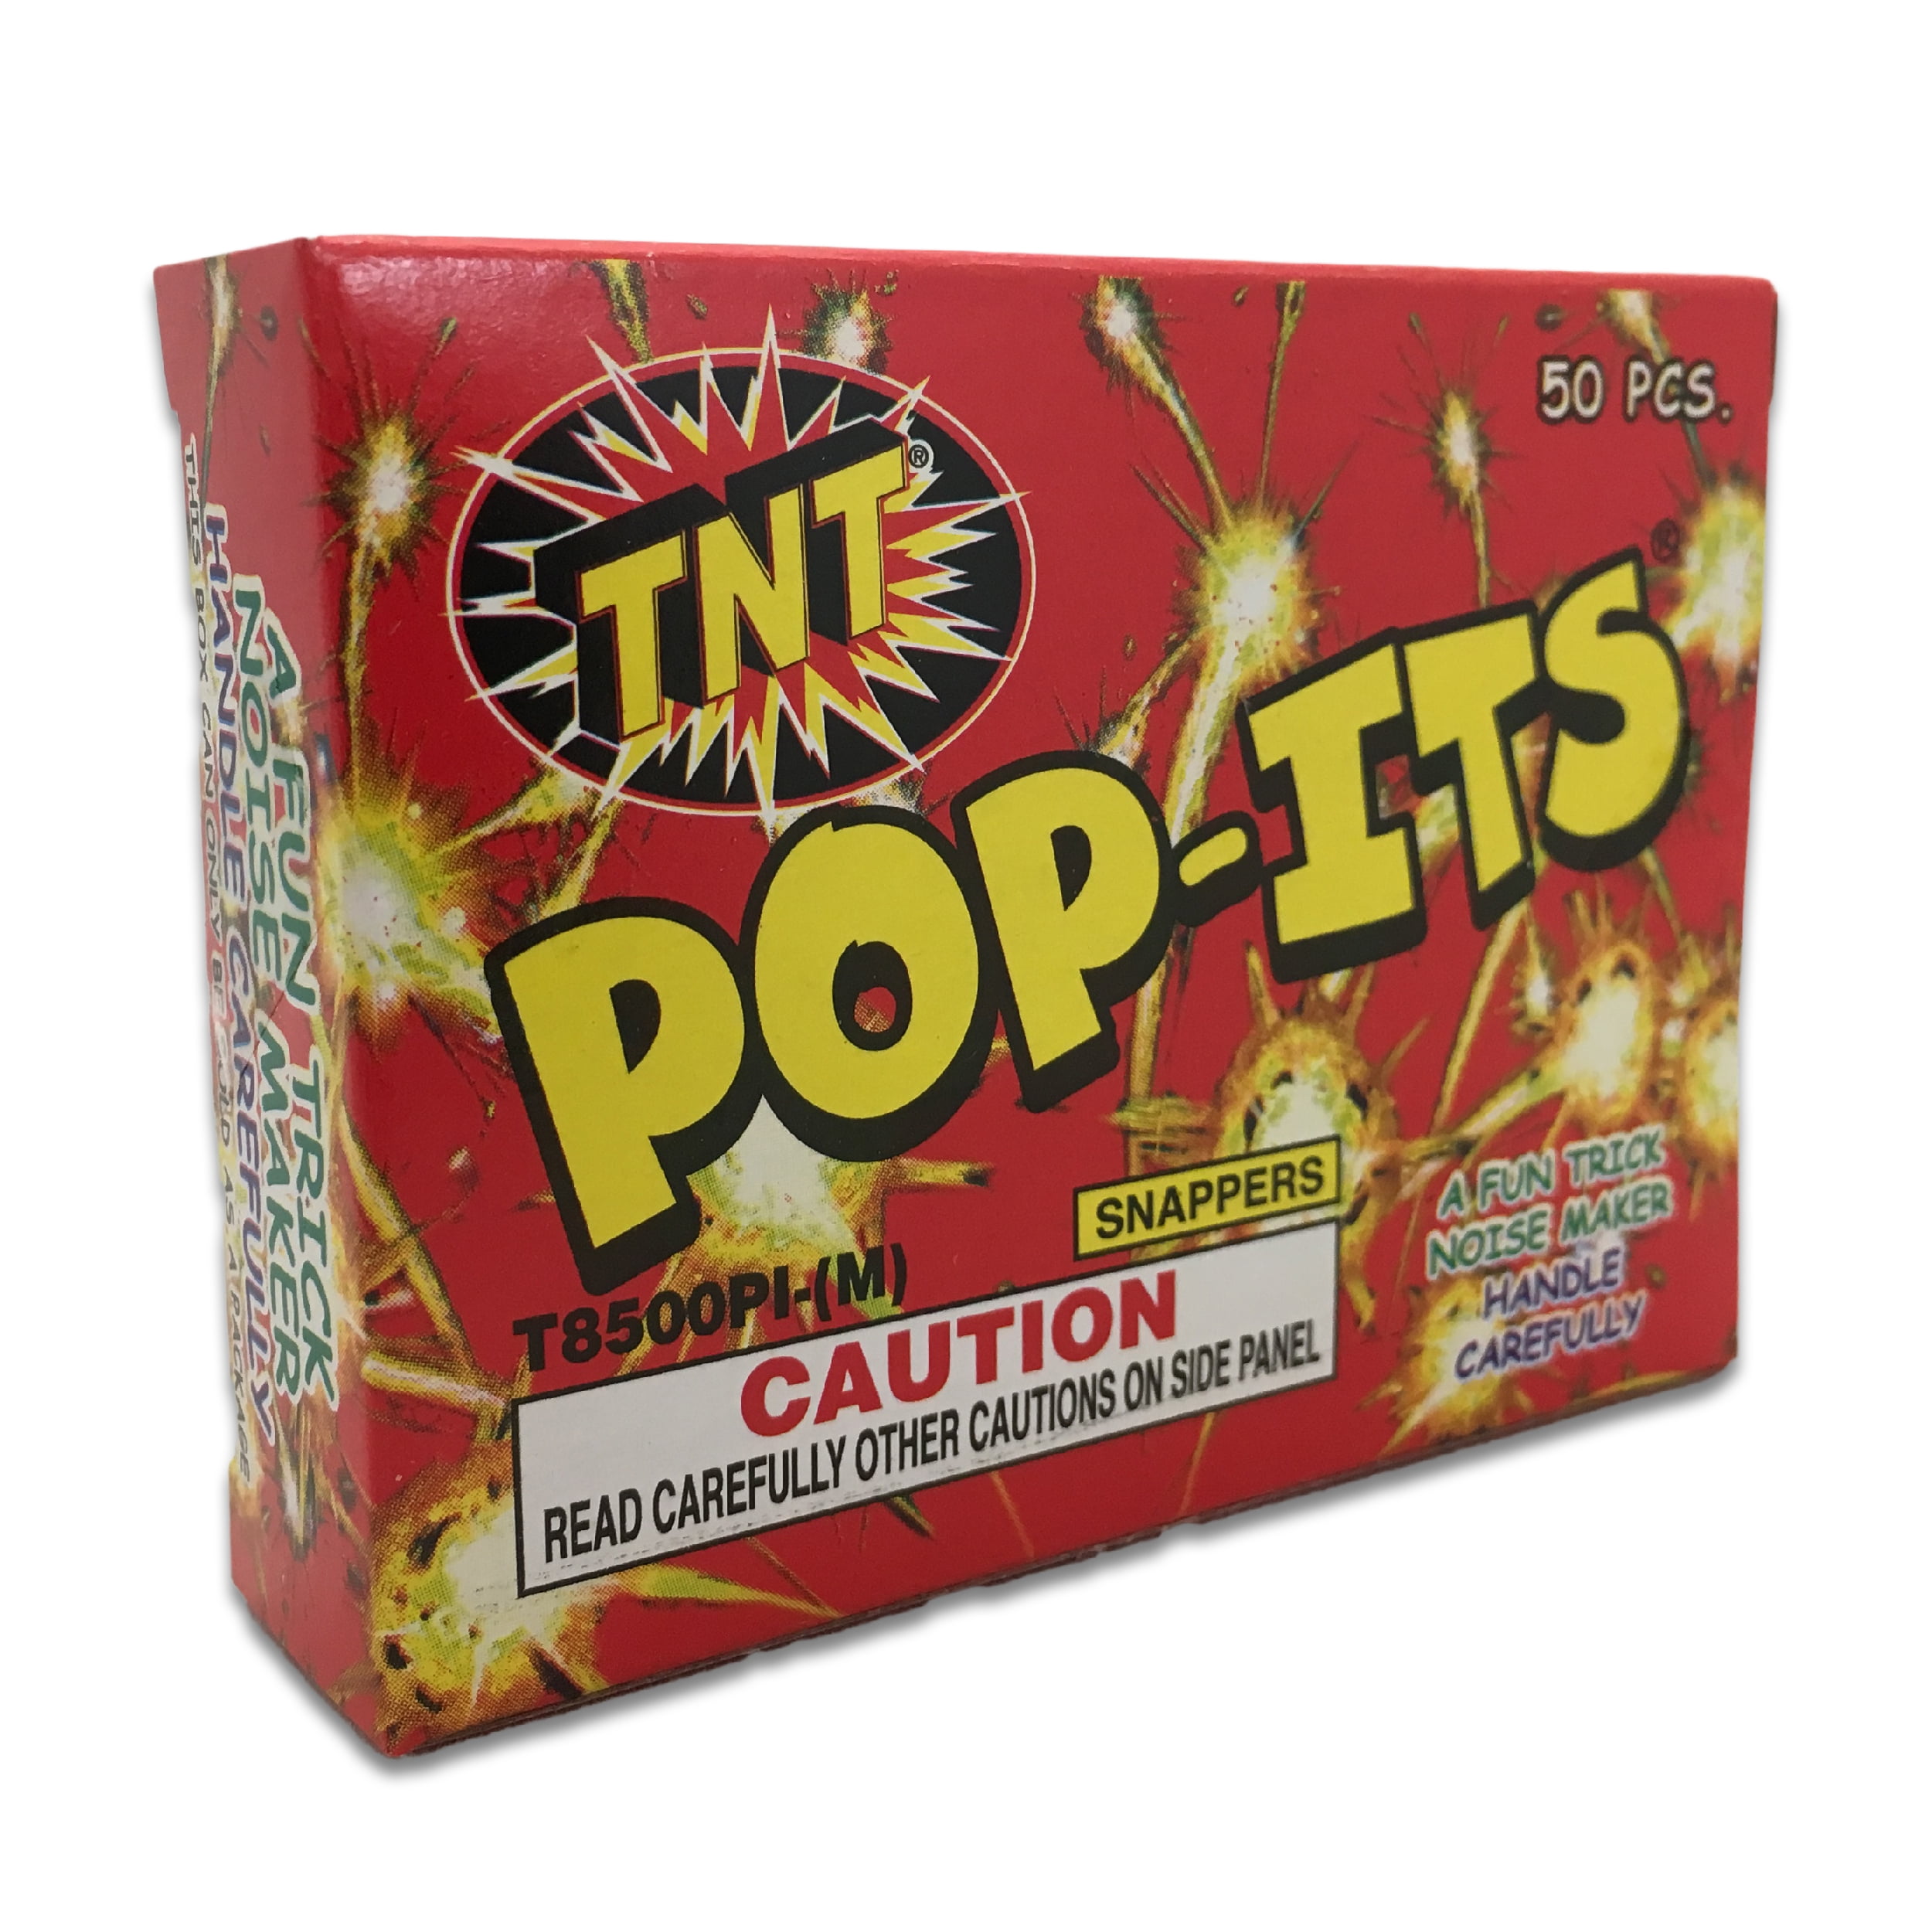 PARTY POP-ITS SNAPS SNAPPERS BIRTHDAYS CELEBRATION 12 PACK 50CT/PK 